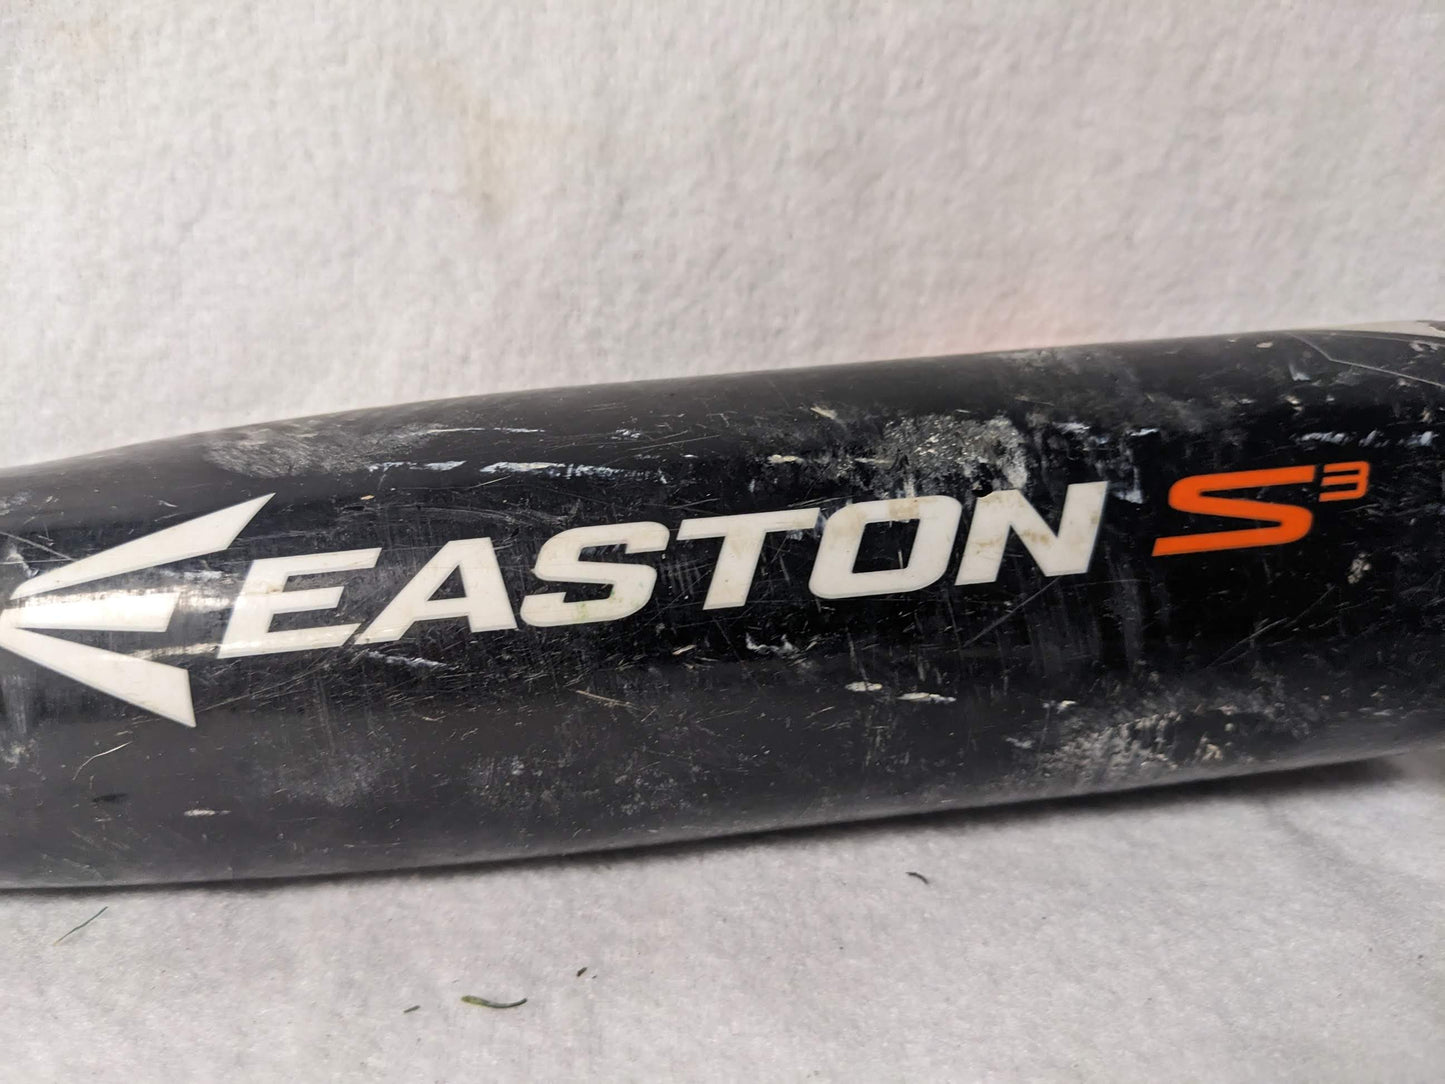 Easton S3 BaseballBat Size 26 In Color Black Condition Used USSSA